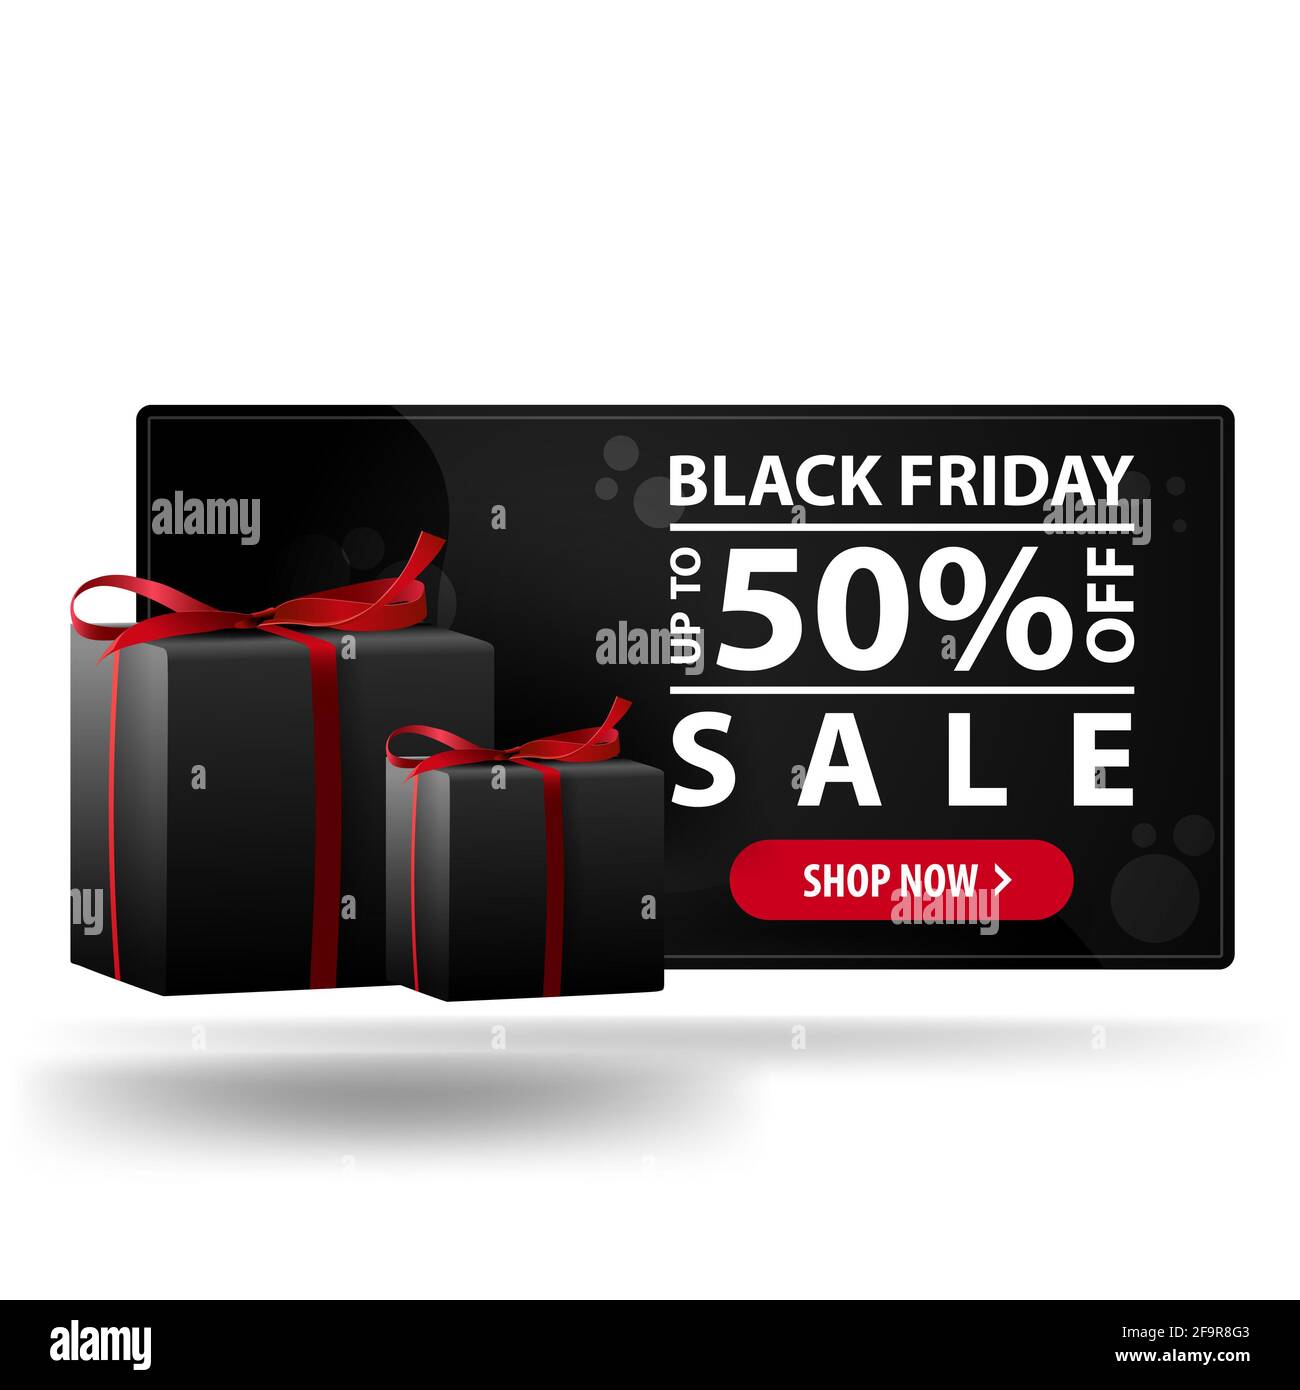 https://c8.alamy.com/comp/2F9R8G3/black-friday-sale-up-to-50-off-modern-black-3d-discount-banner-with-gifts-2F9R8G3.jpg